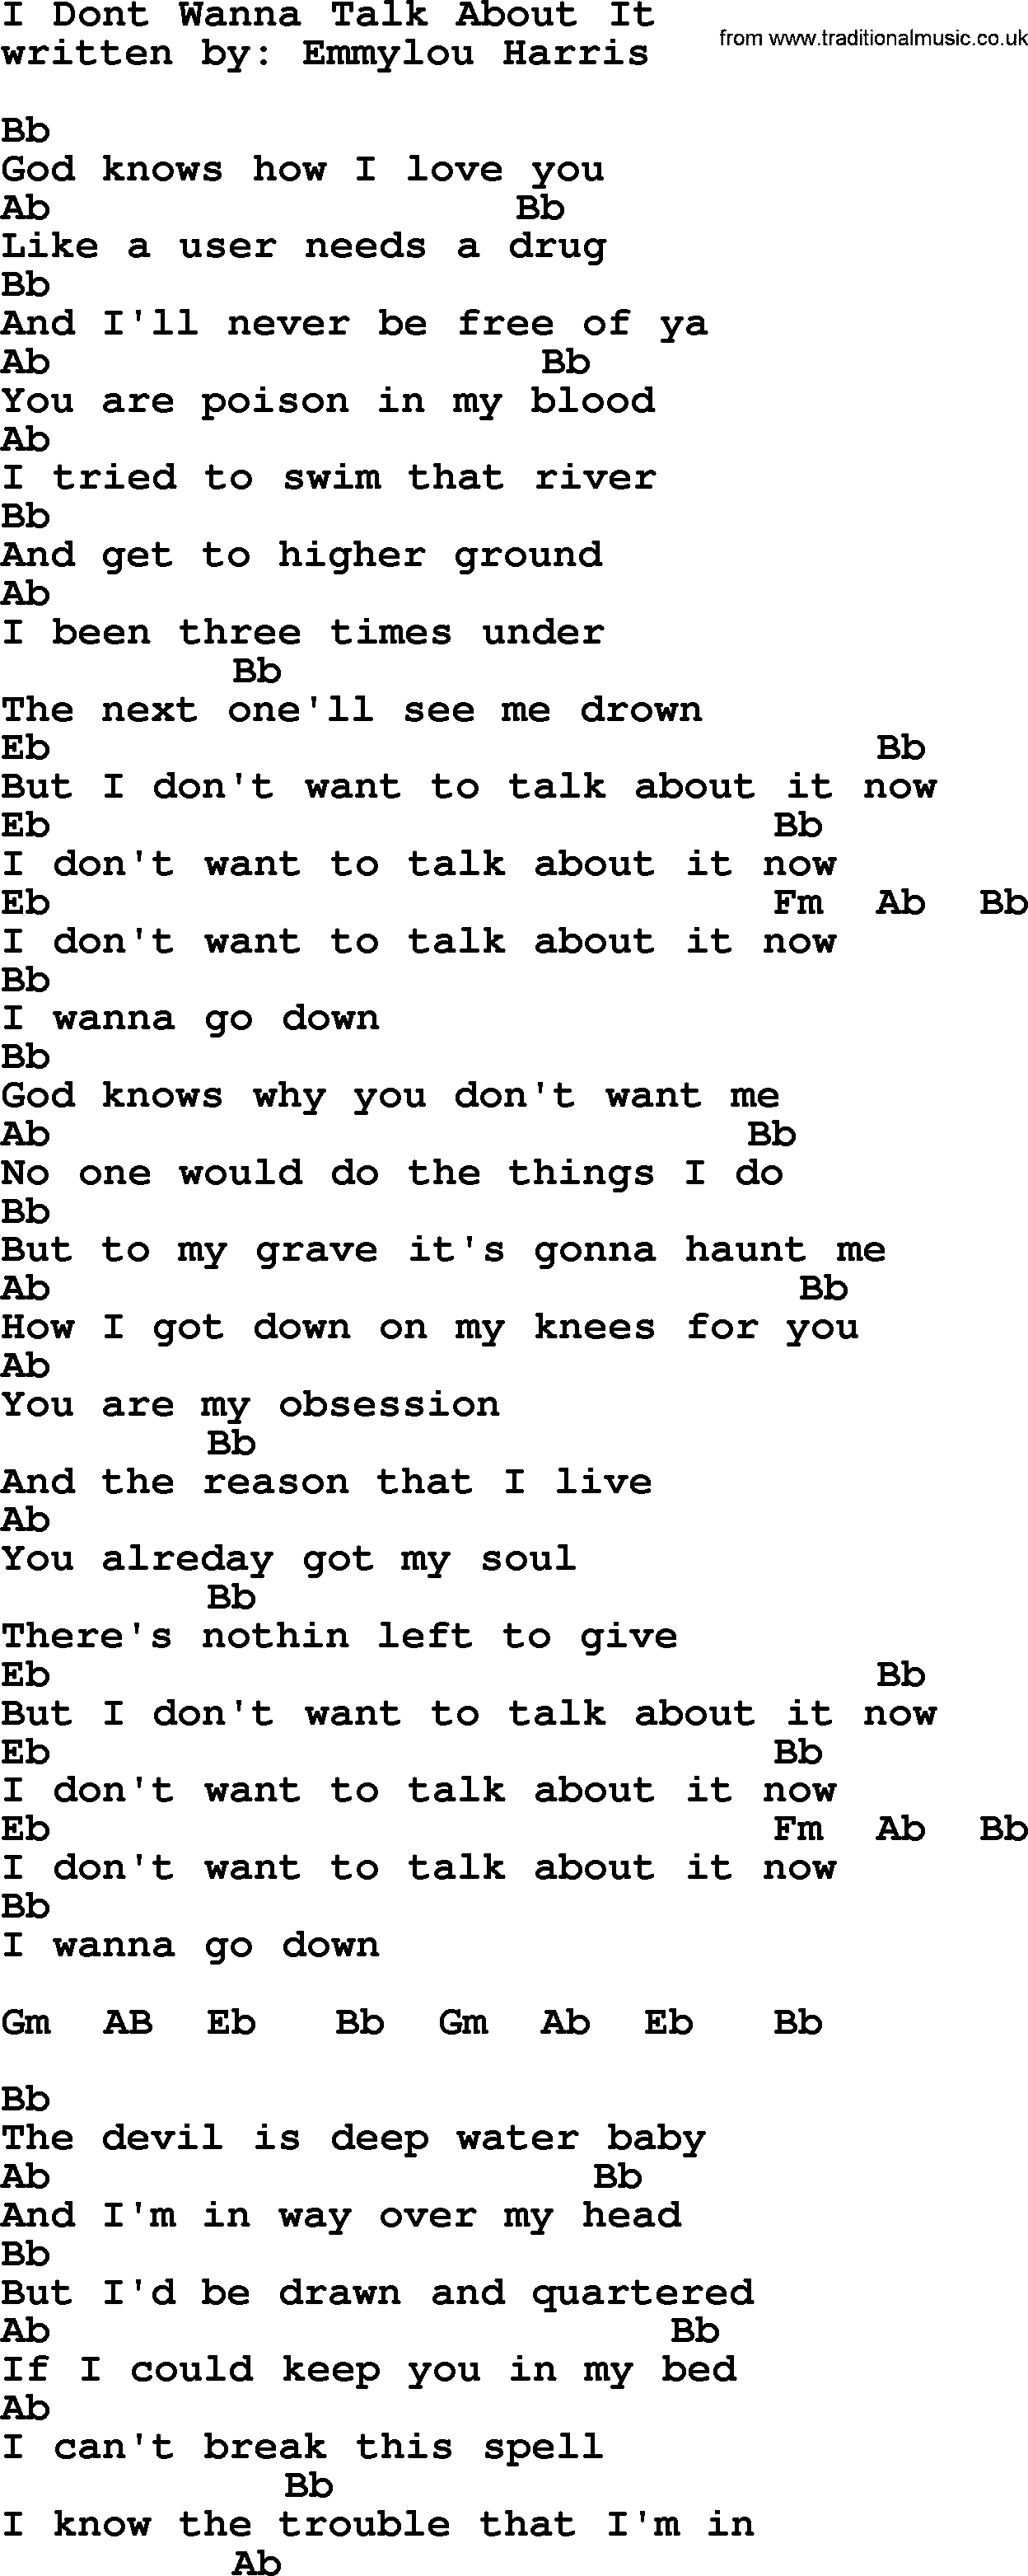 Emmylou Harris song: I Dont Wanna Talk About It lyrics and chords